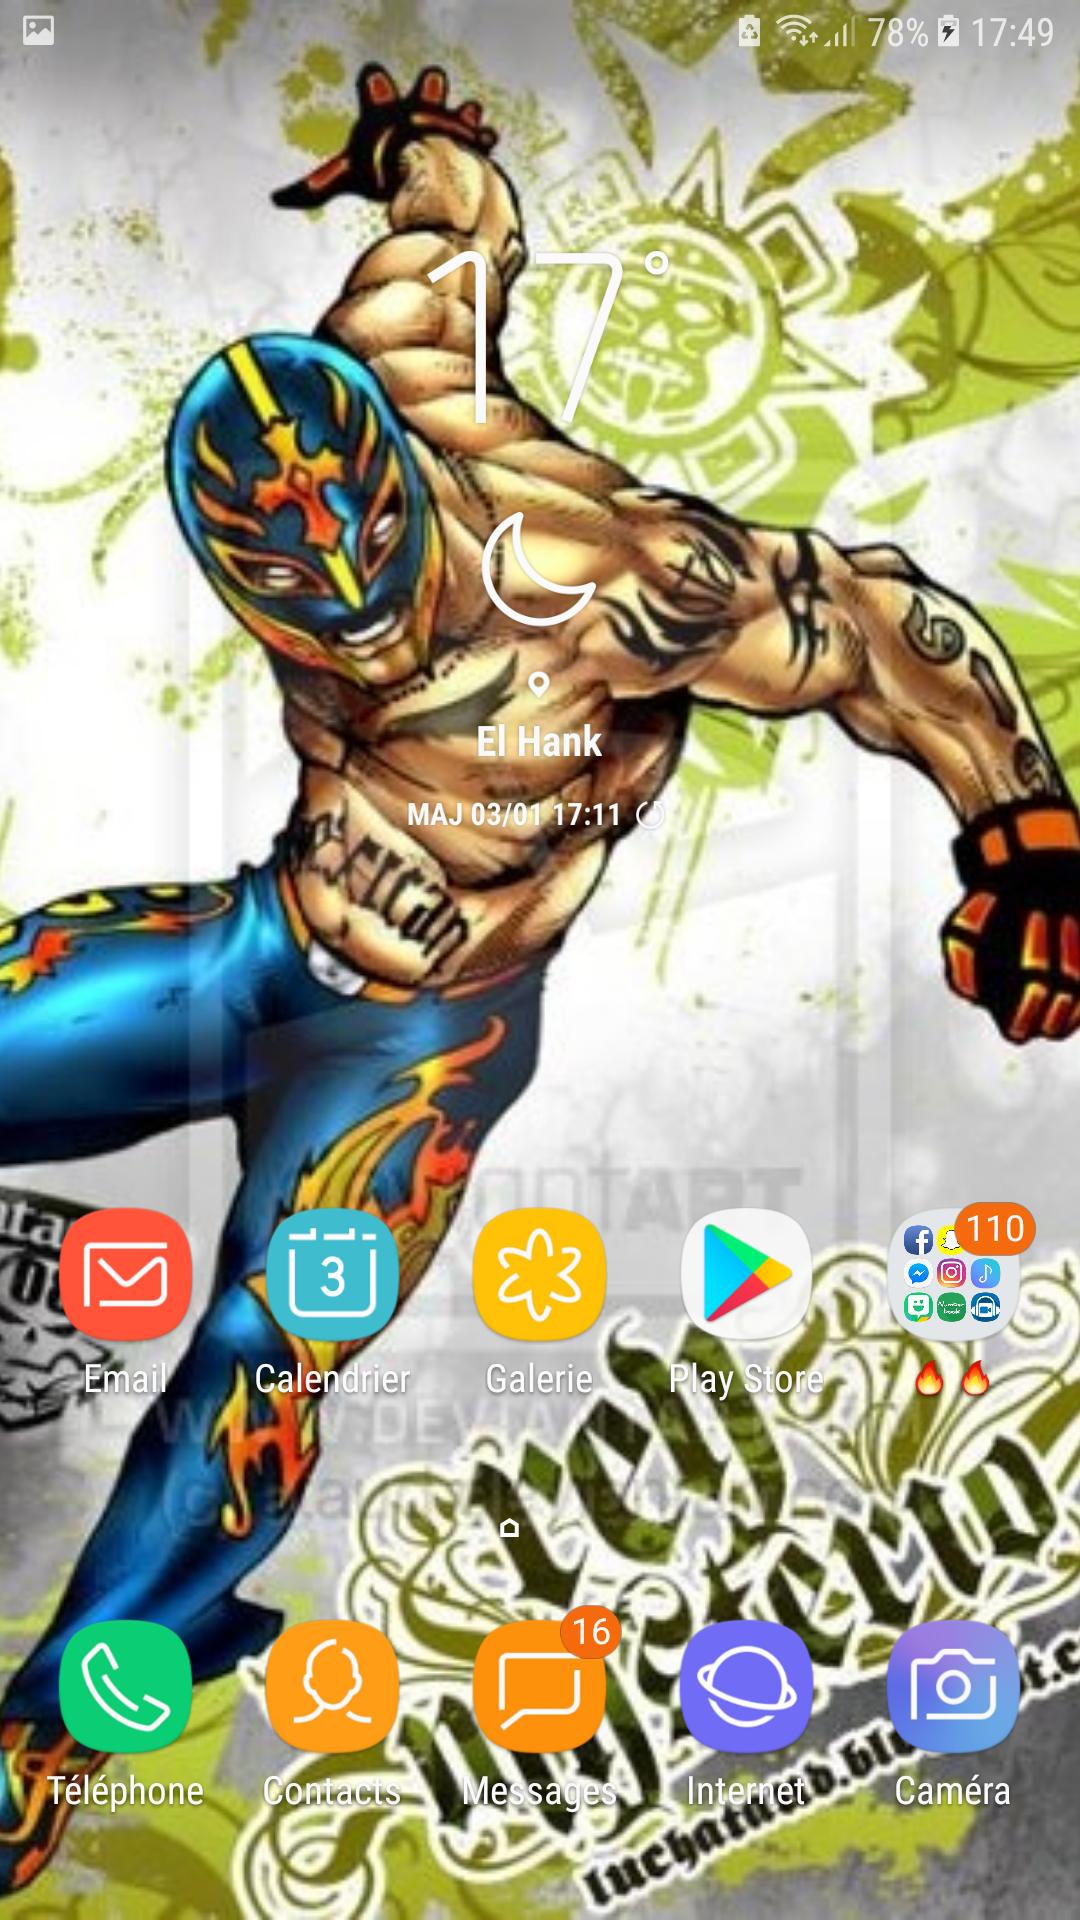 Wallpapers Hd Of Rey Mysterio 2018 For Android Apk Download